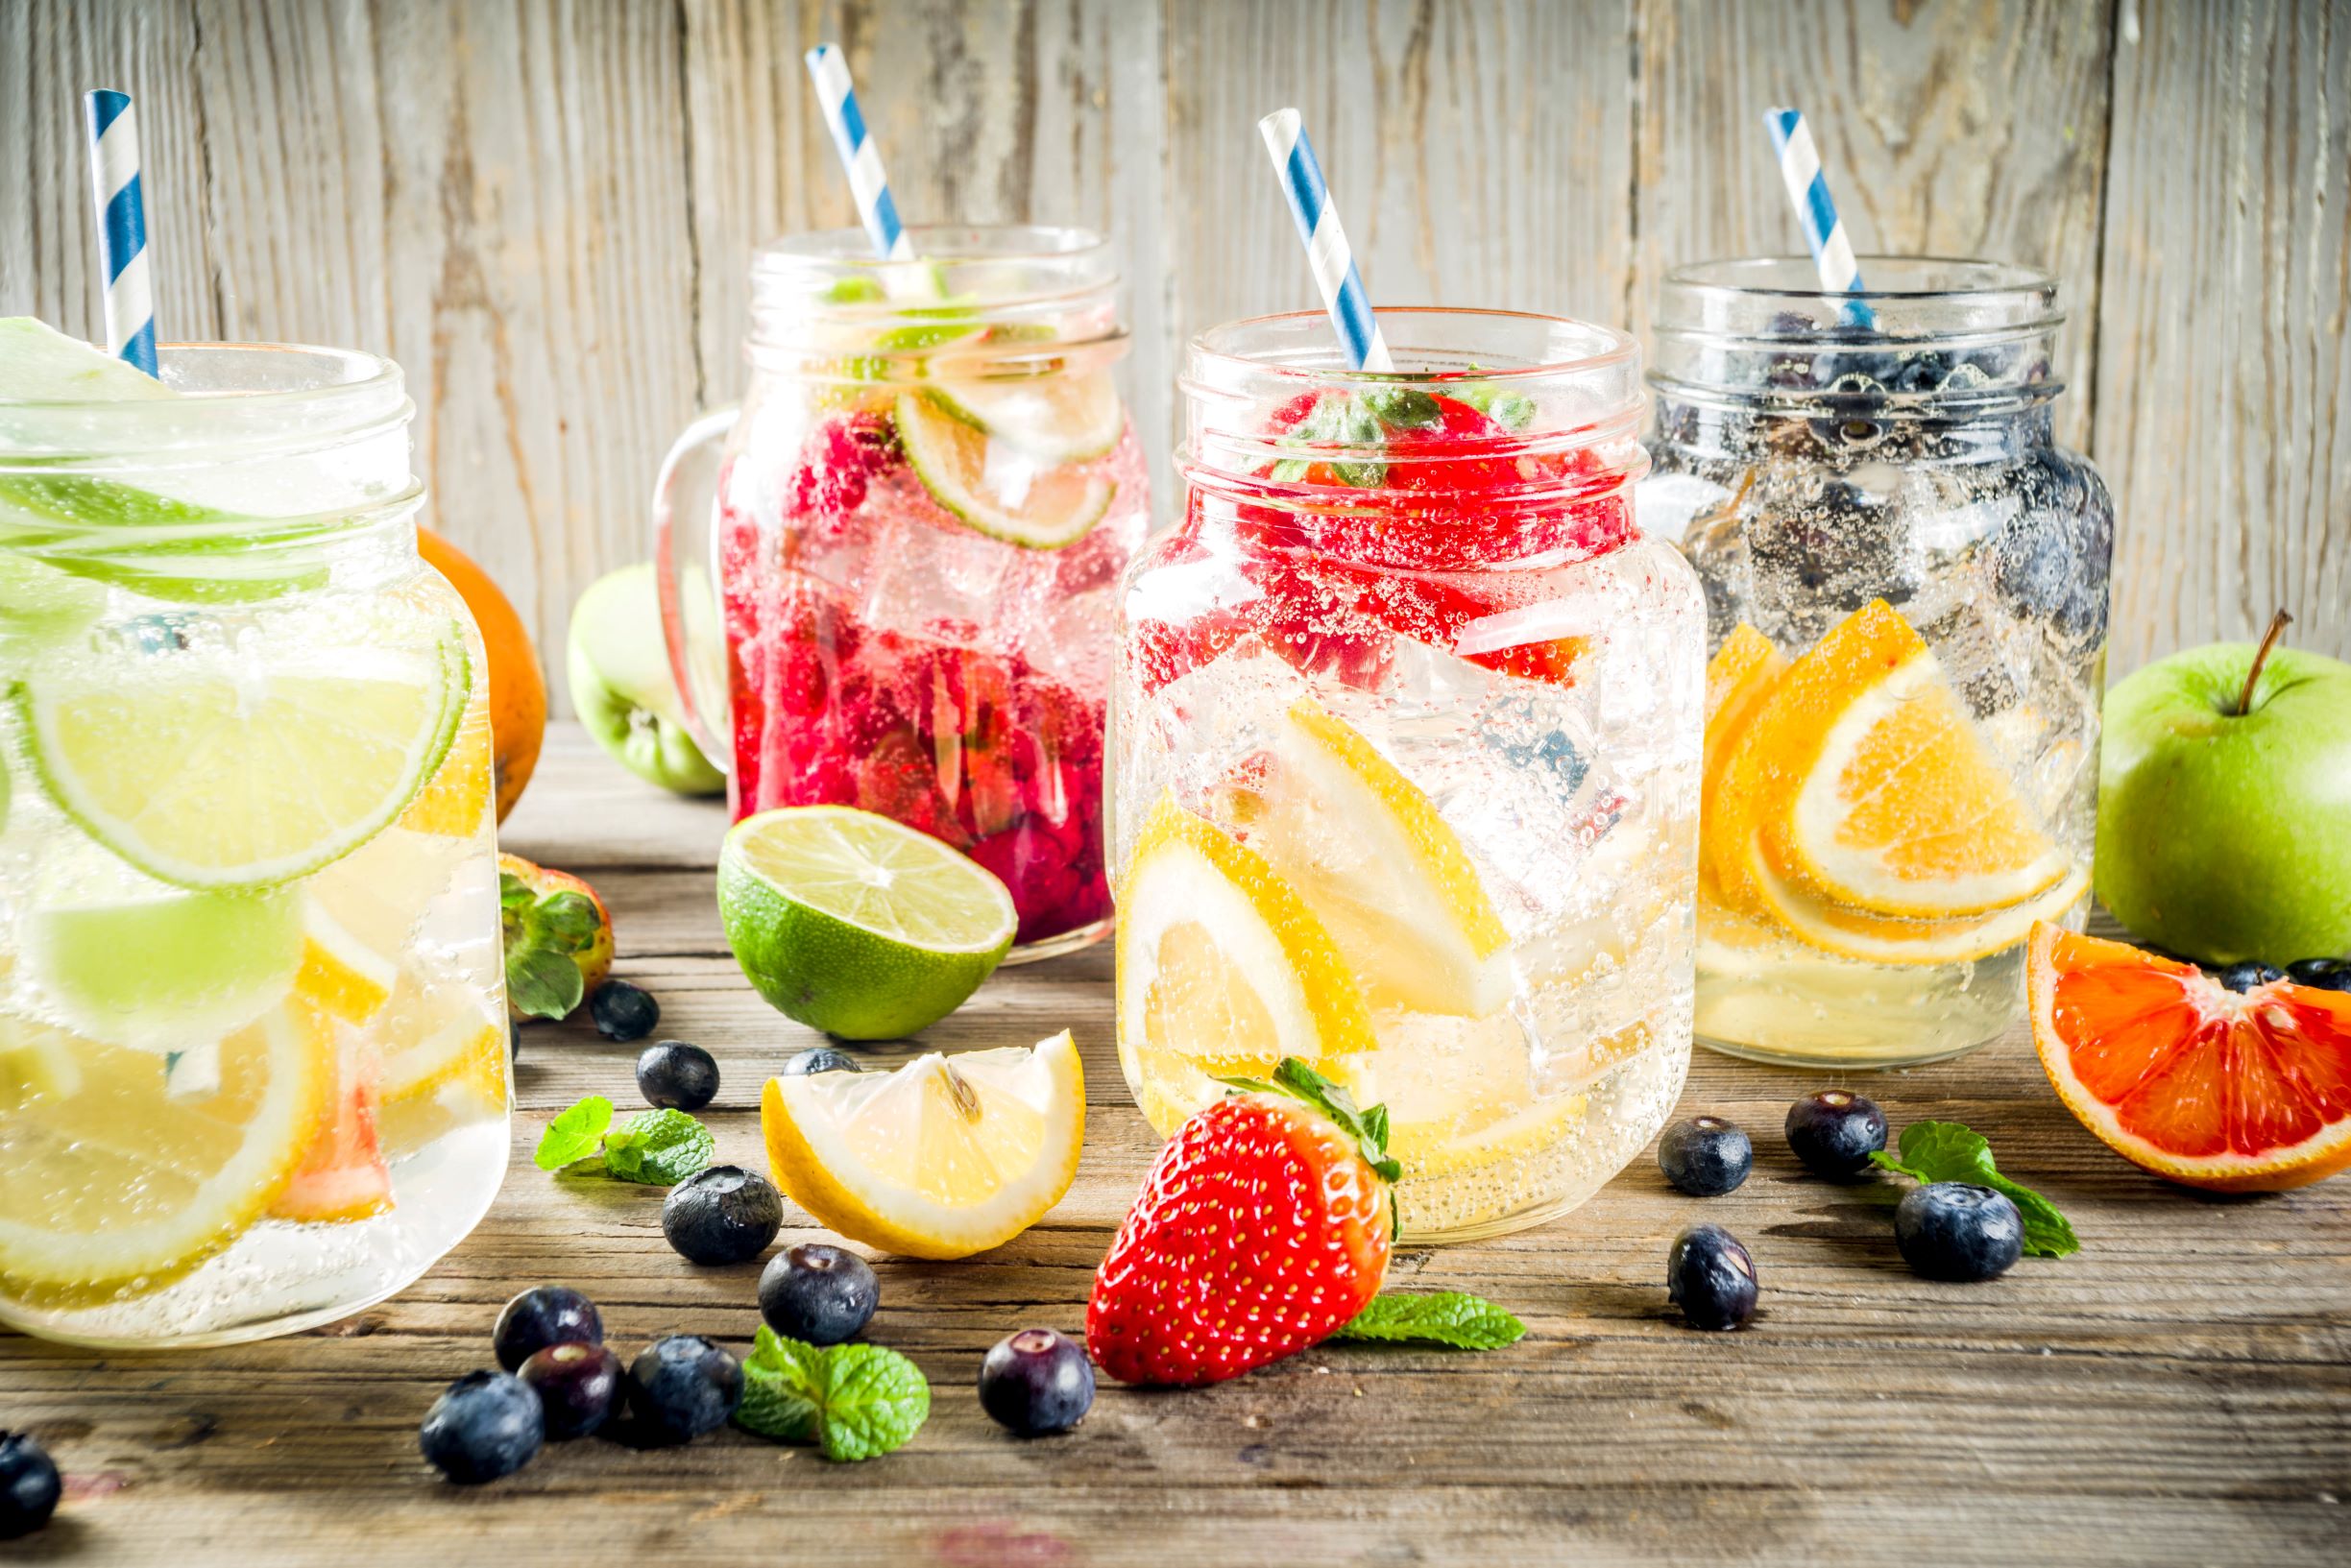 Fruit cocktails in mason jars with limes, lemons, oranges, strawberries and blueberries